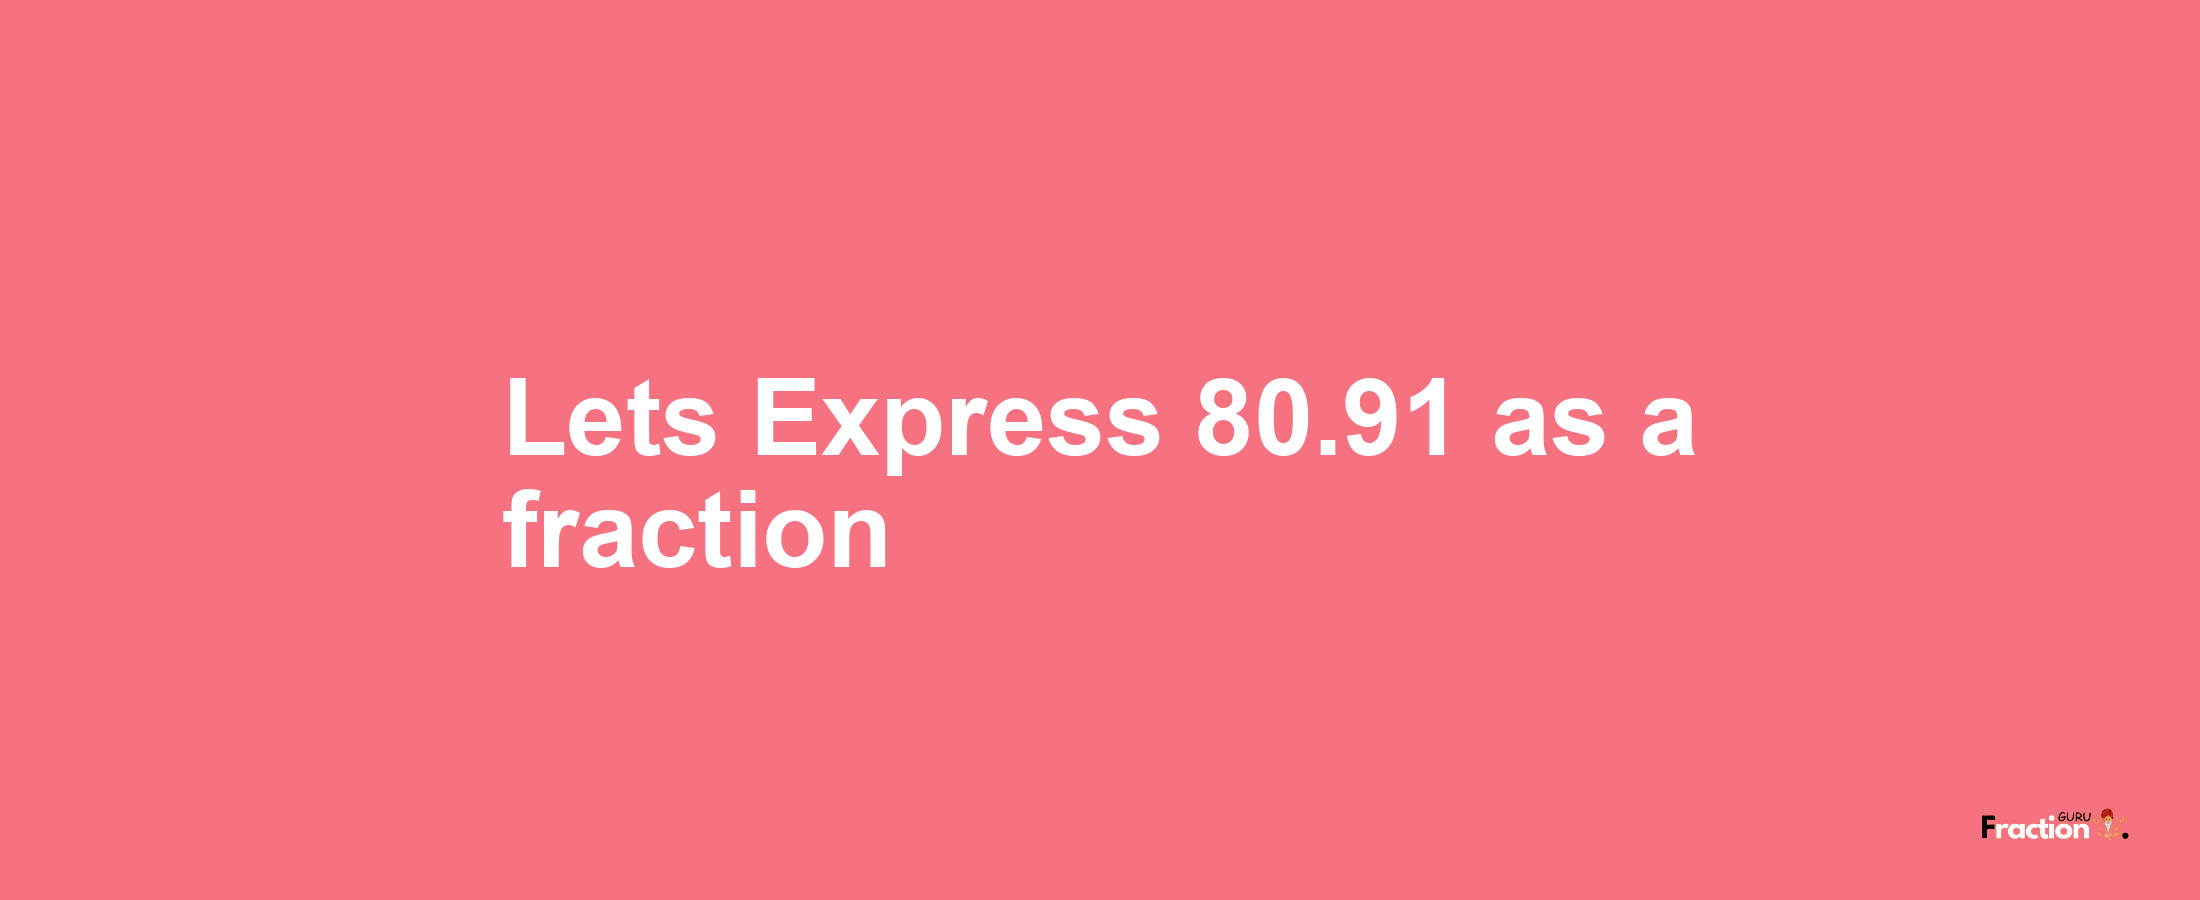 Lets Express 80.91 as afraction